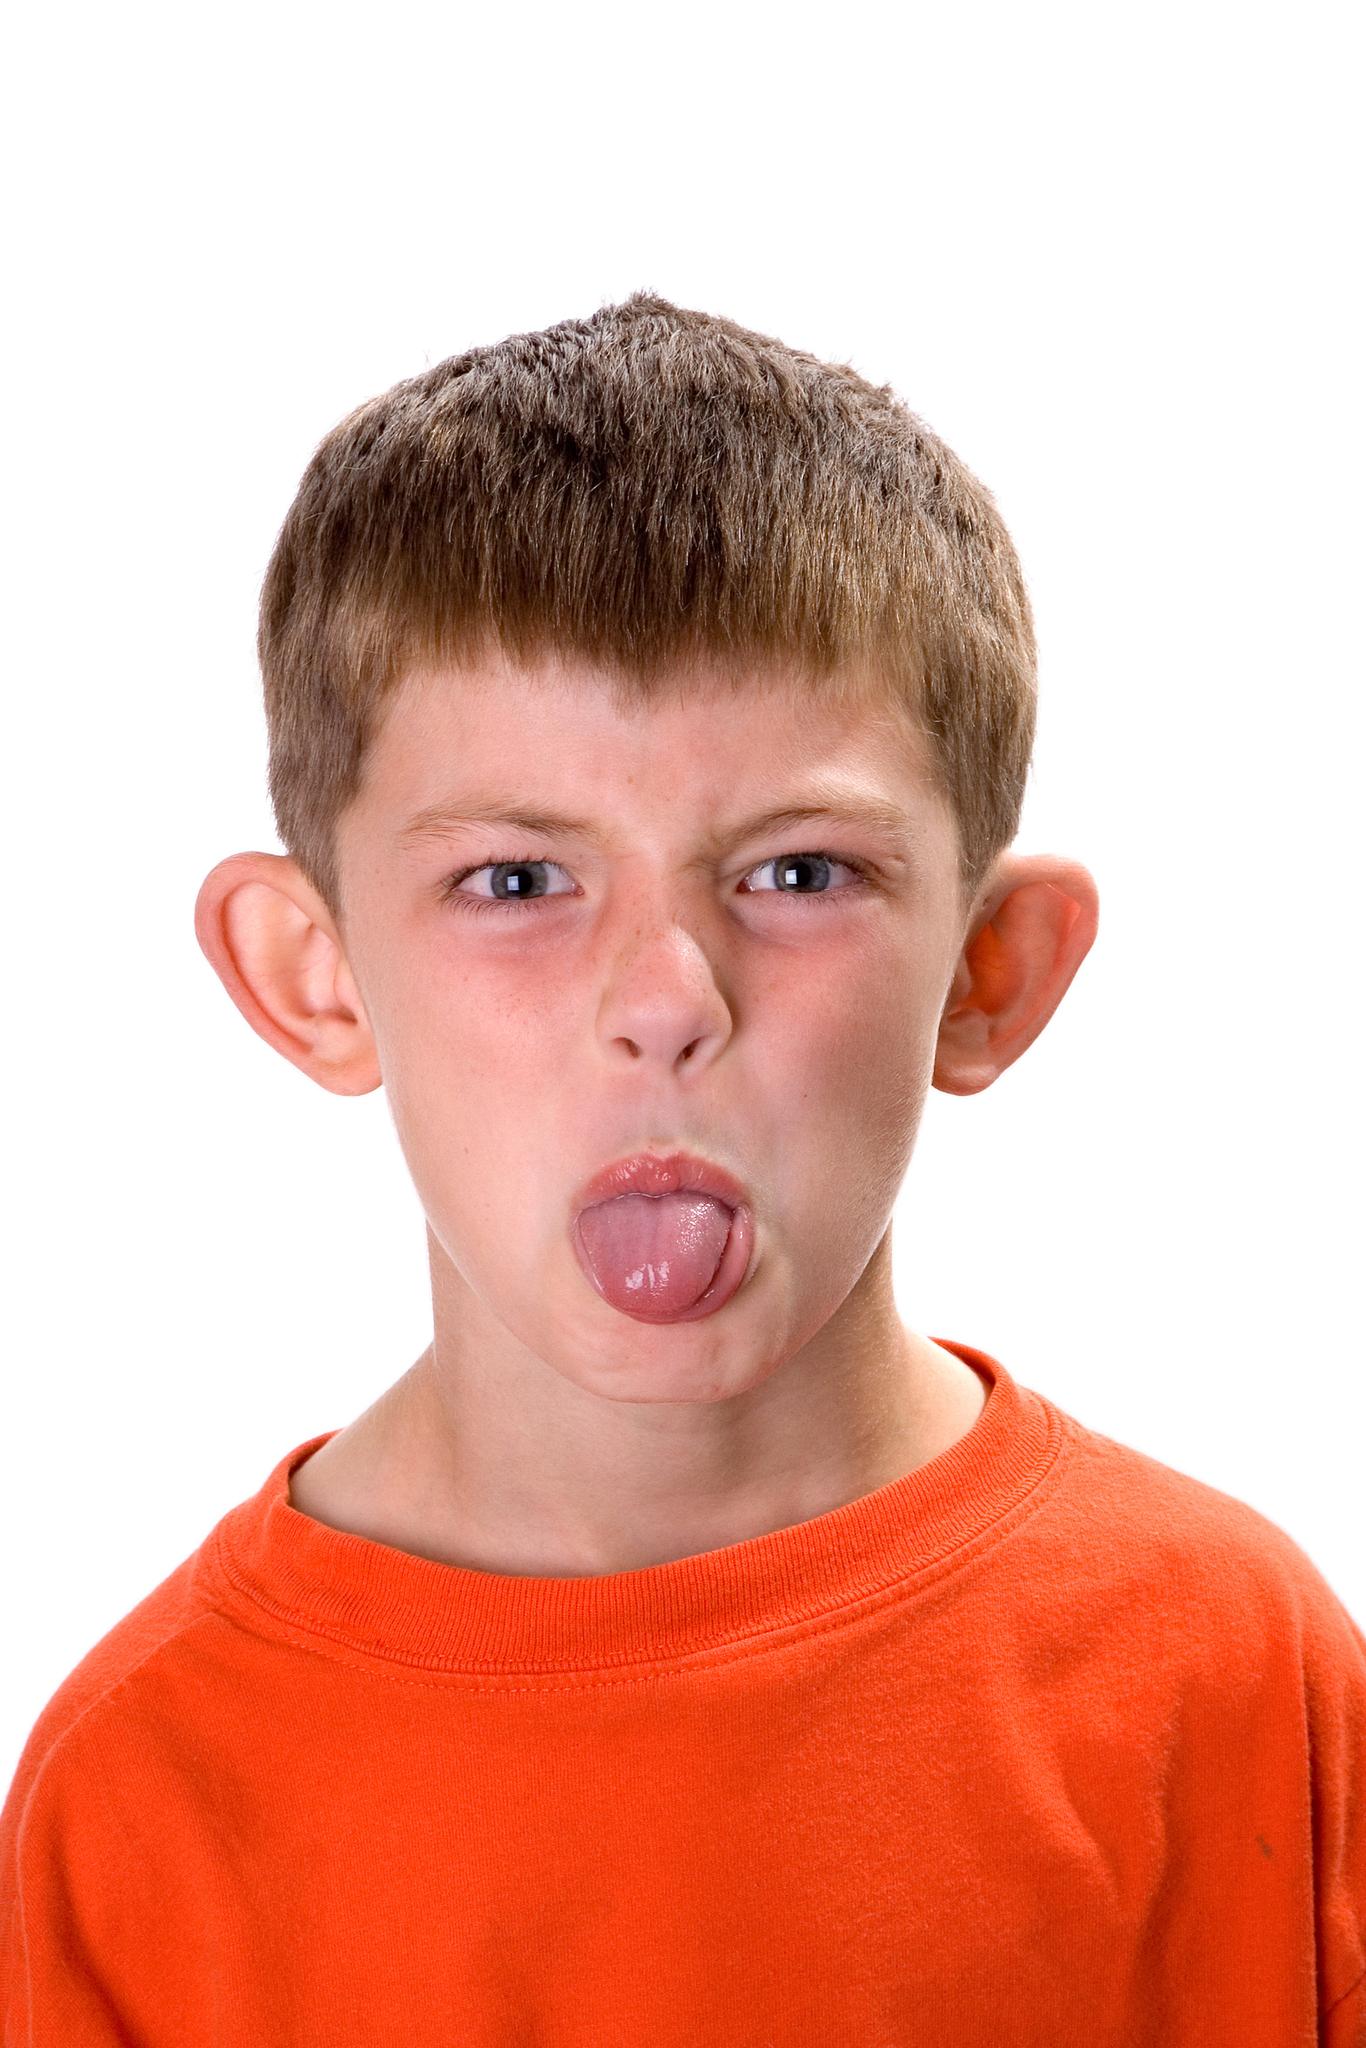 Young Boy Sticking Out His Tongue On A White Background The